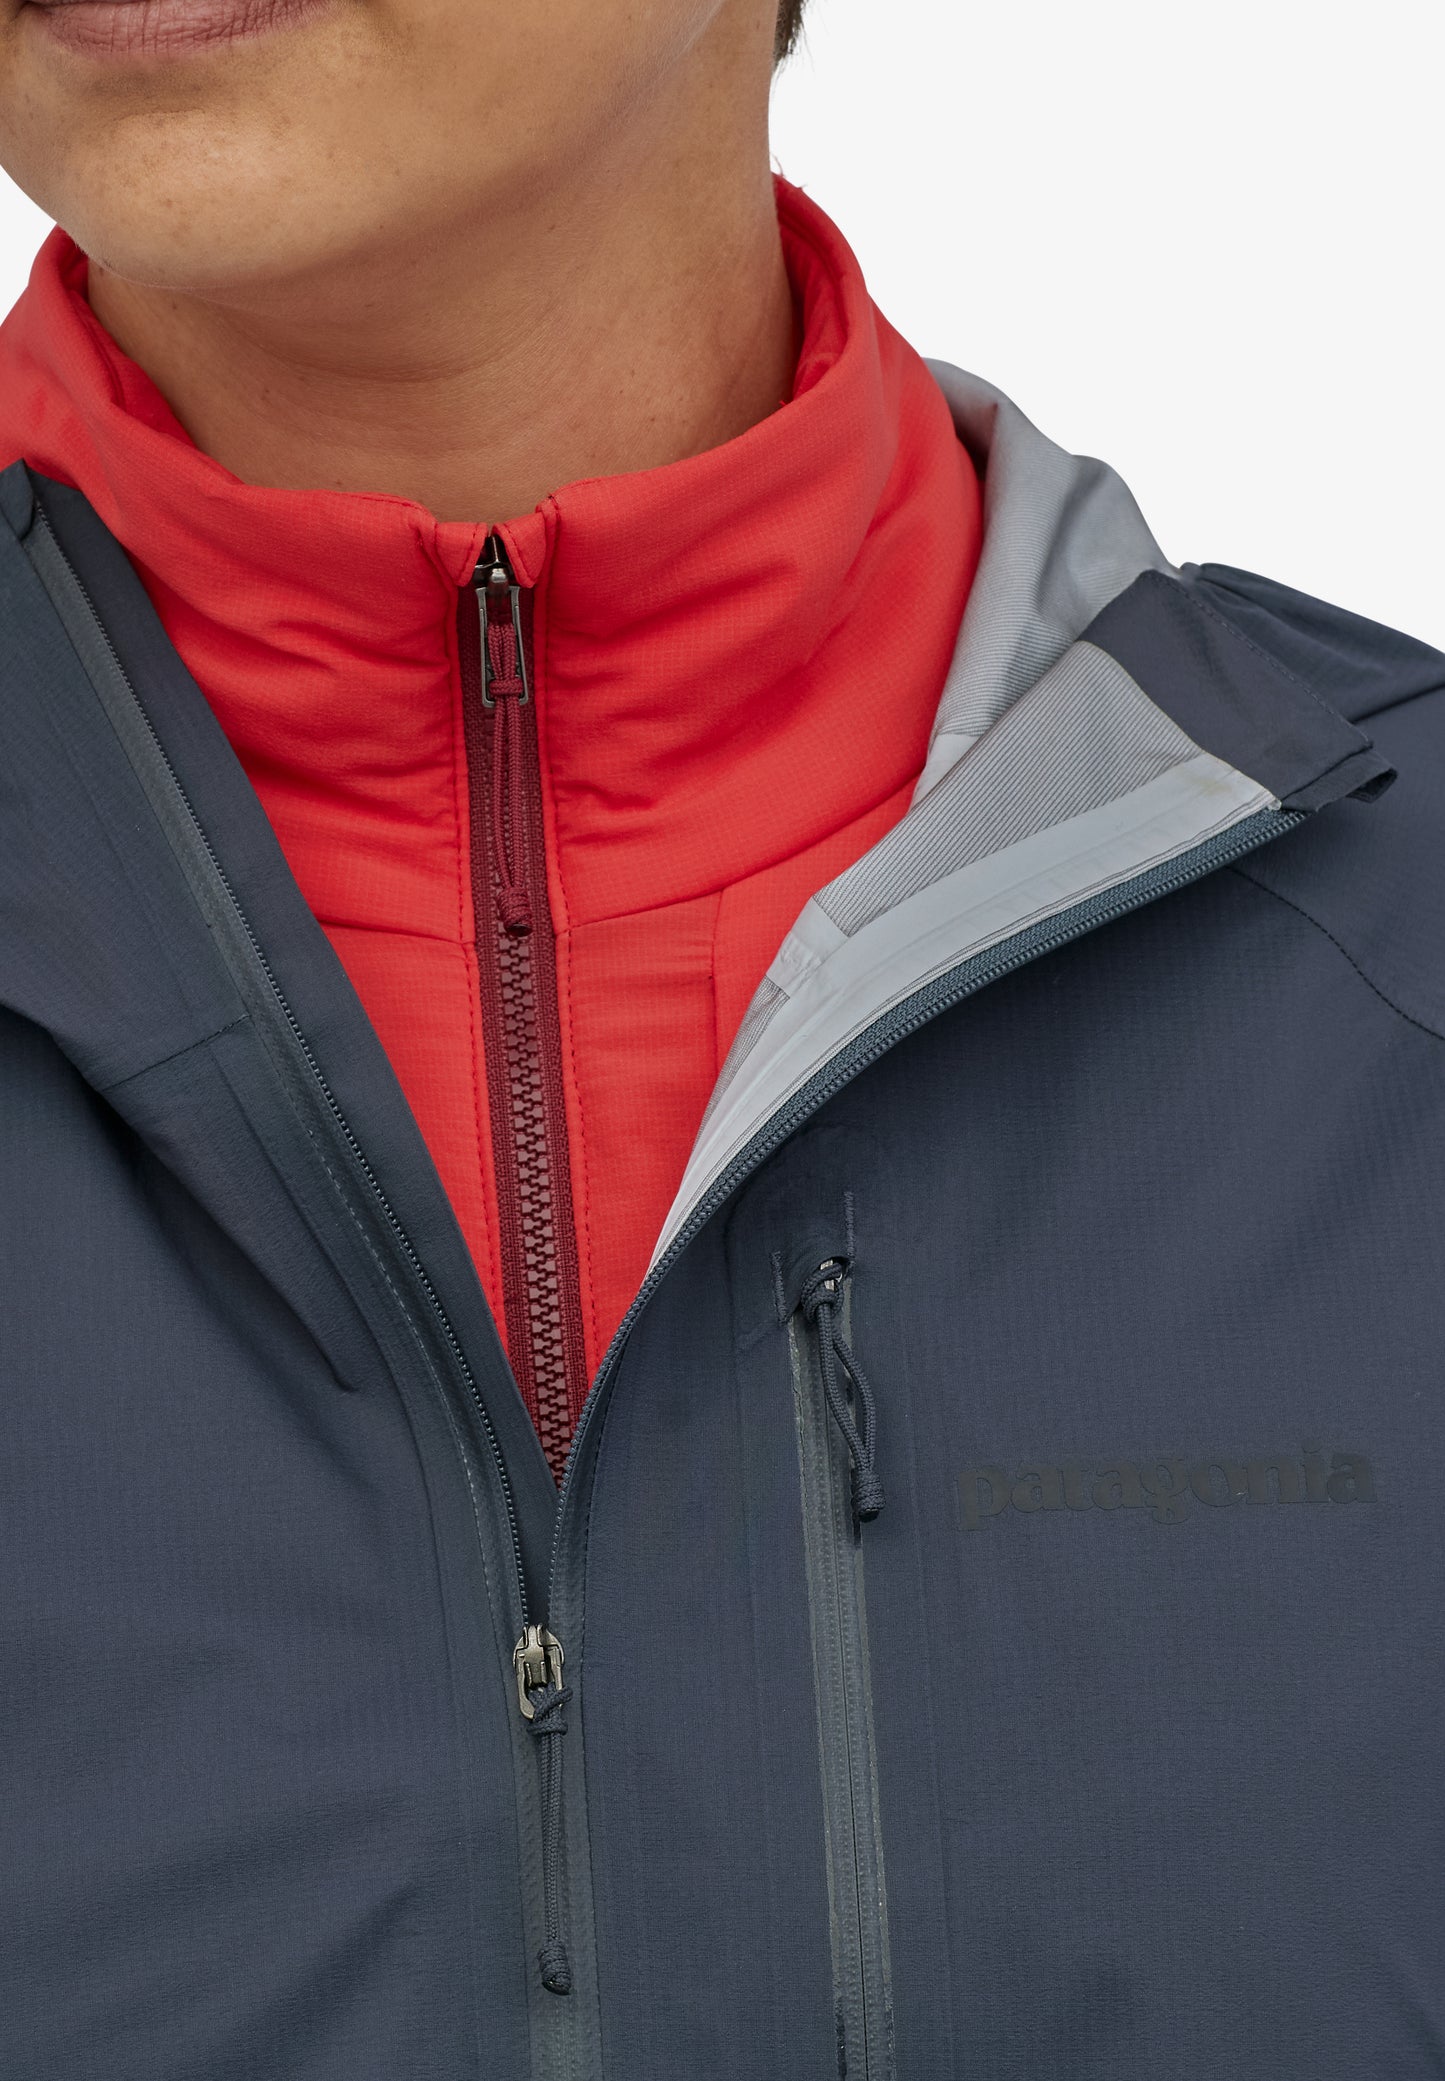 PATAGONIA | CHAQUETA ULTRALIGERA IMPERMEABLE MUJER